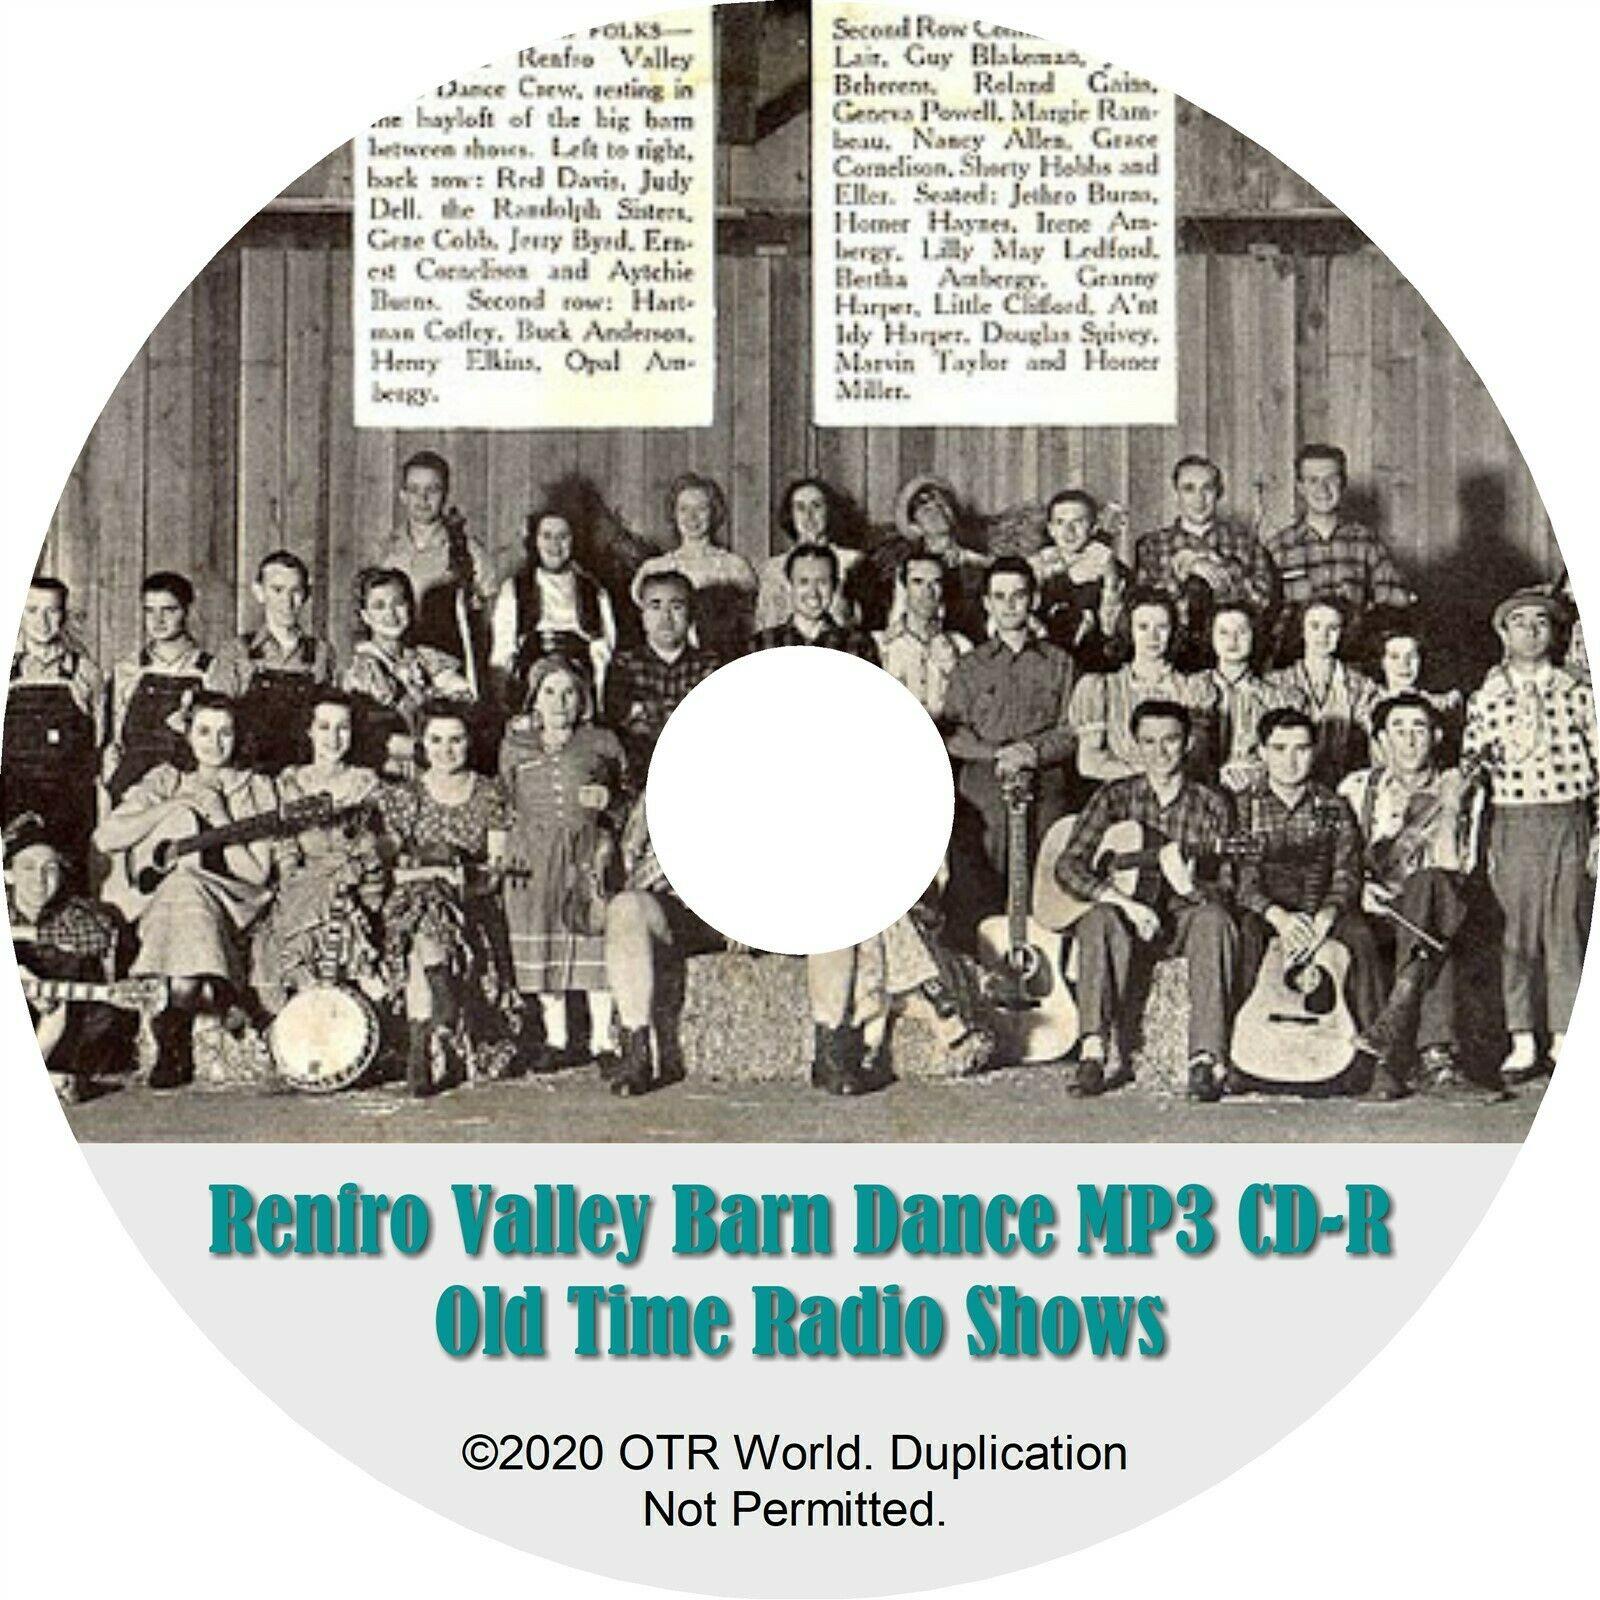 Renfro Valley Barn Dance Old Time Radio Shows 3 Episodes OTR OTRS On MP3 CD-R